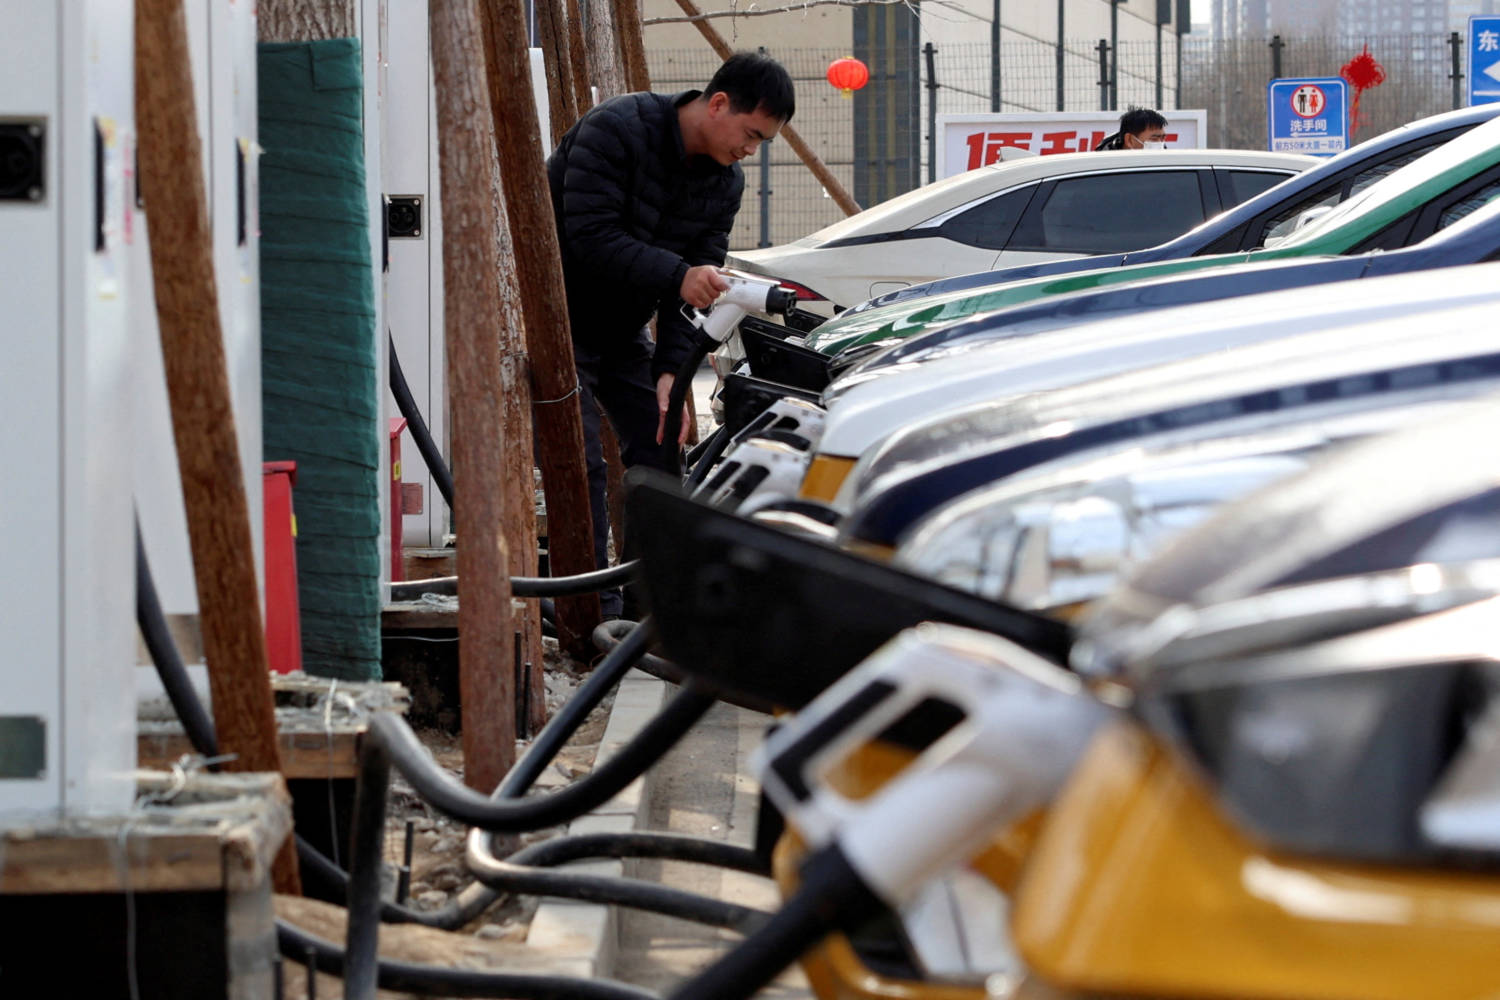 File Photo: A Man Charges A Car At An Ev Charging Station In Beijing